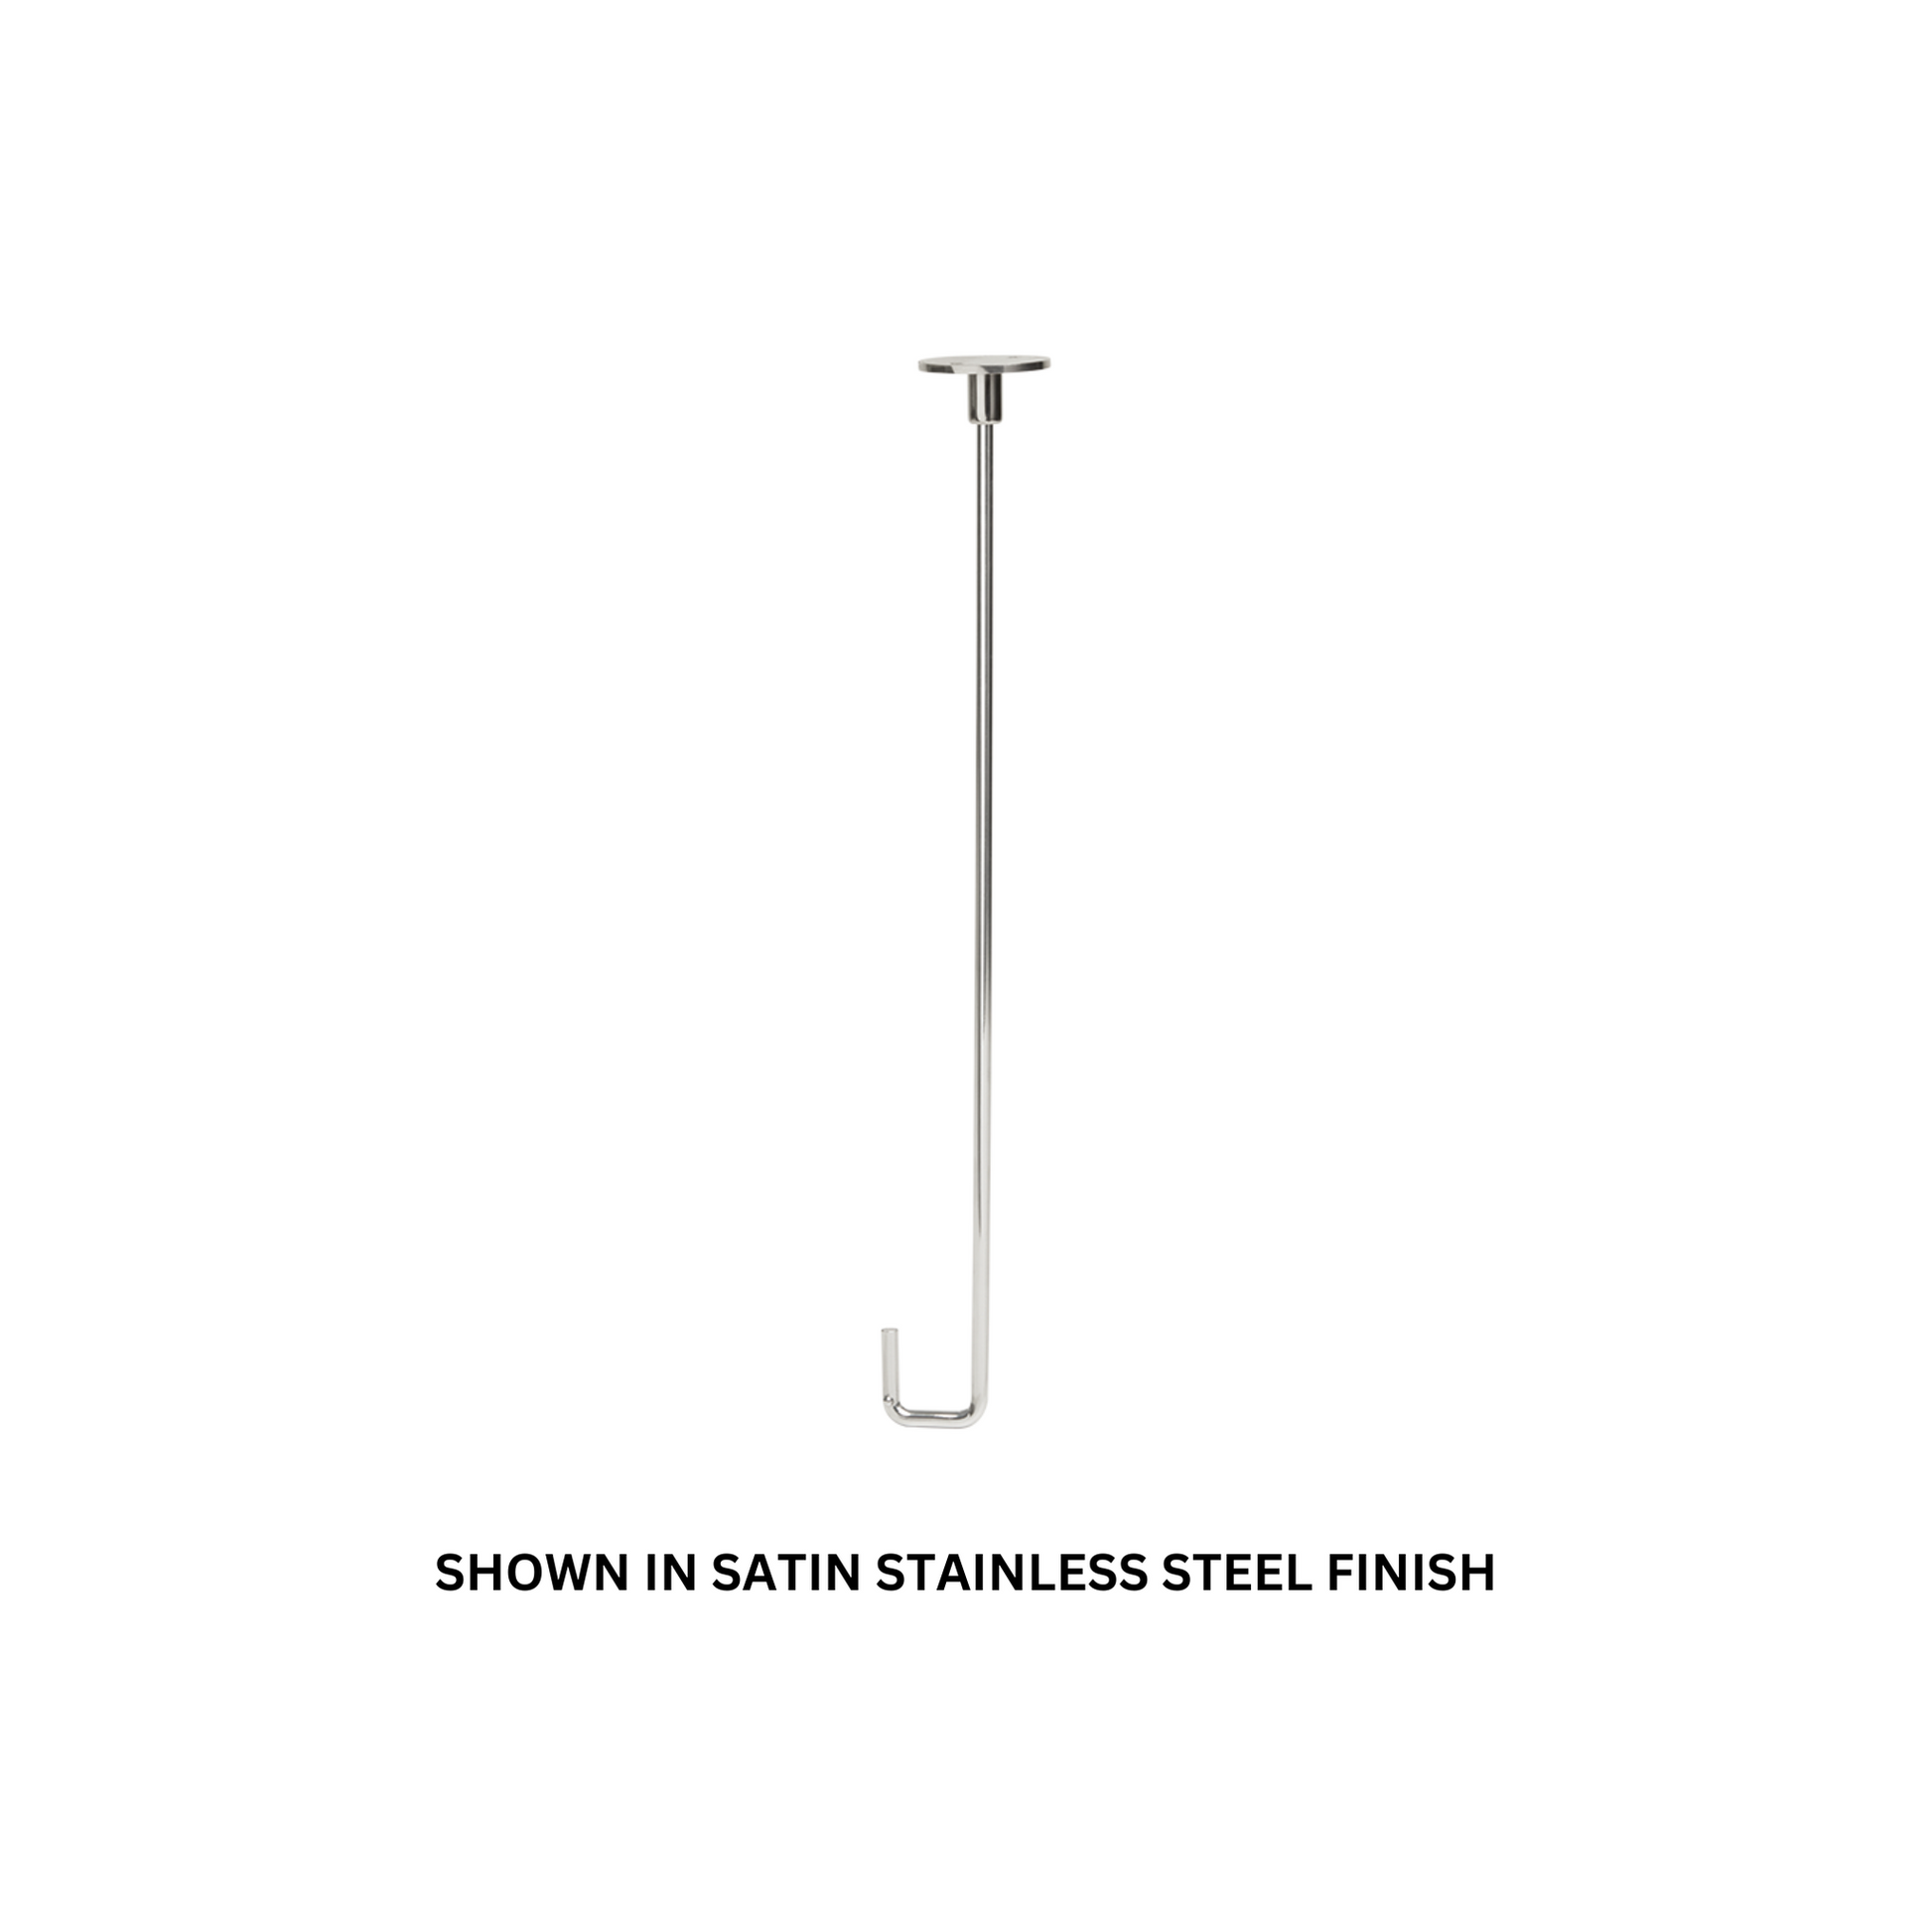 Seachrome Signature Series 24" Polished Stainless Steel J-Hook Ceiling Support for L-Shaped Shower Rods